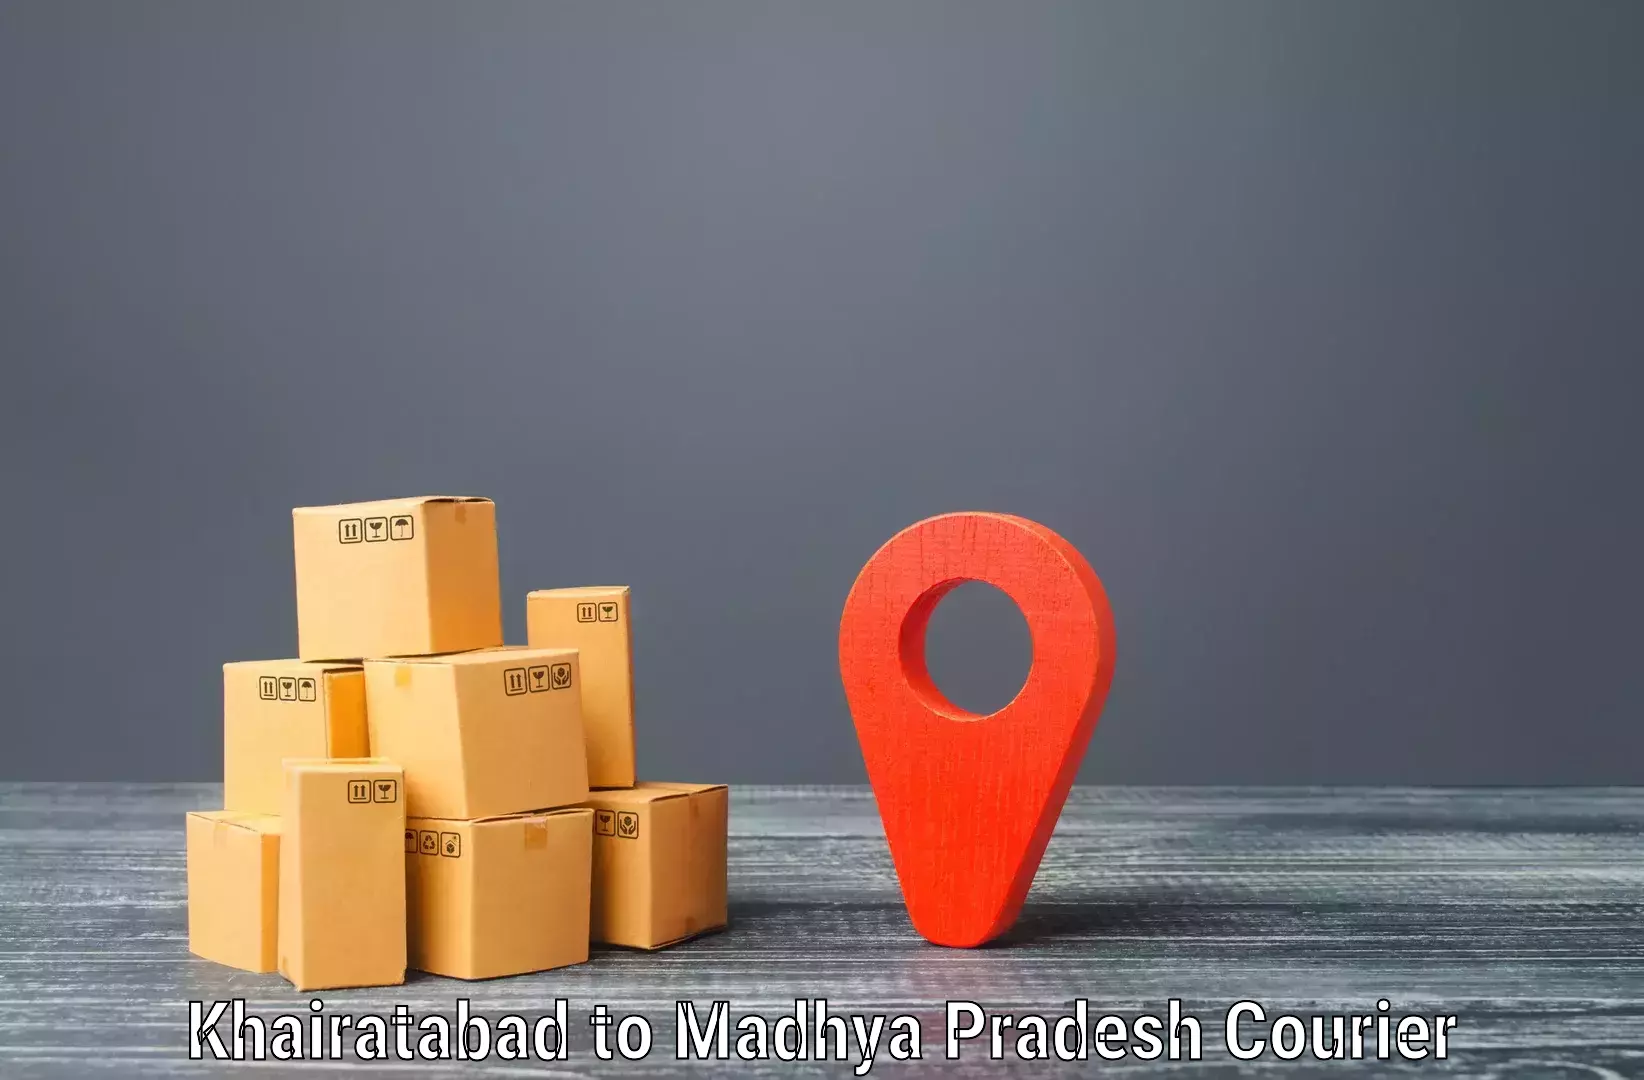 Supply chain delivery Khairatabad to Chhatarpur